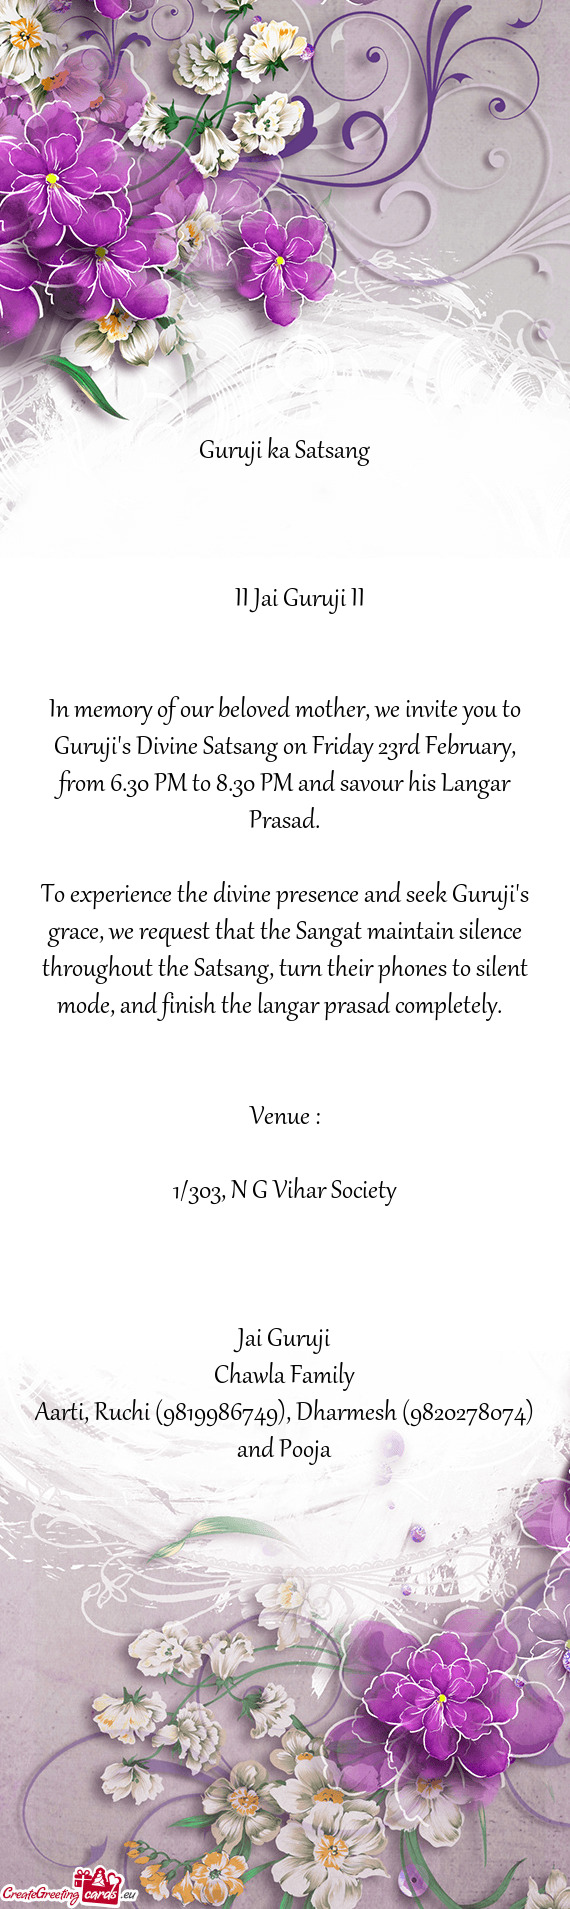 In memory of our beloved mother, we invite you to Guruji